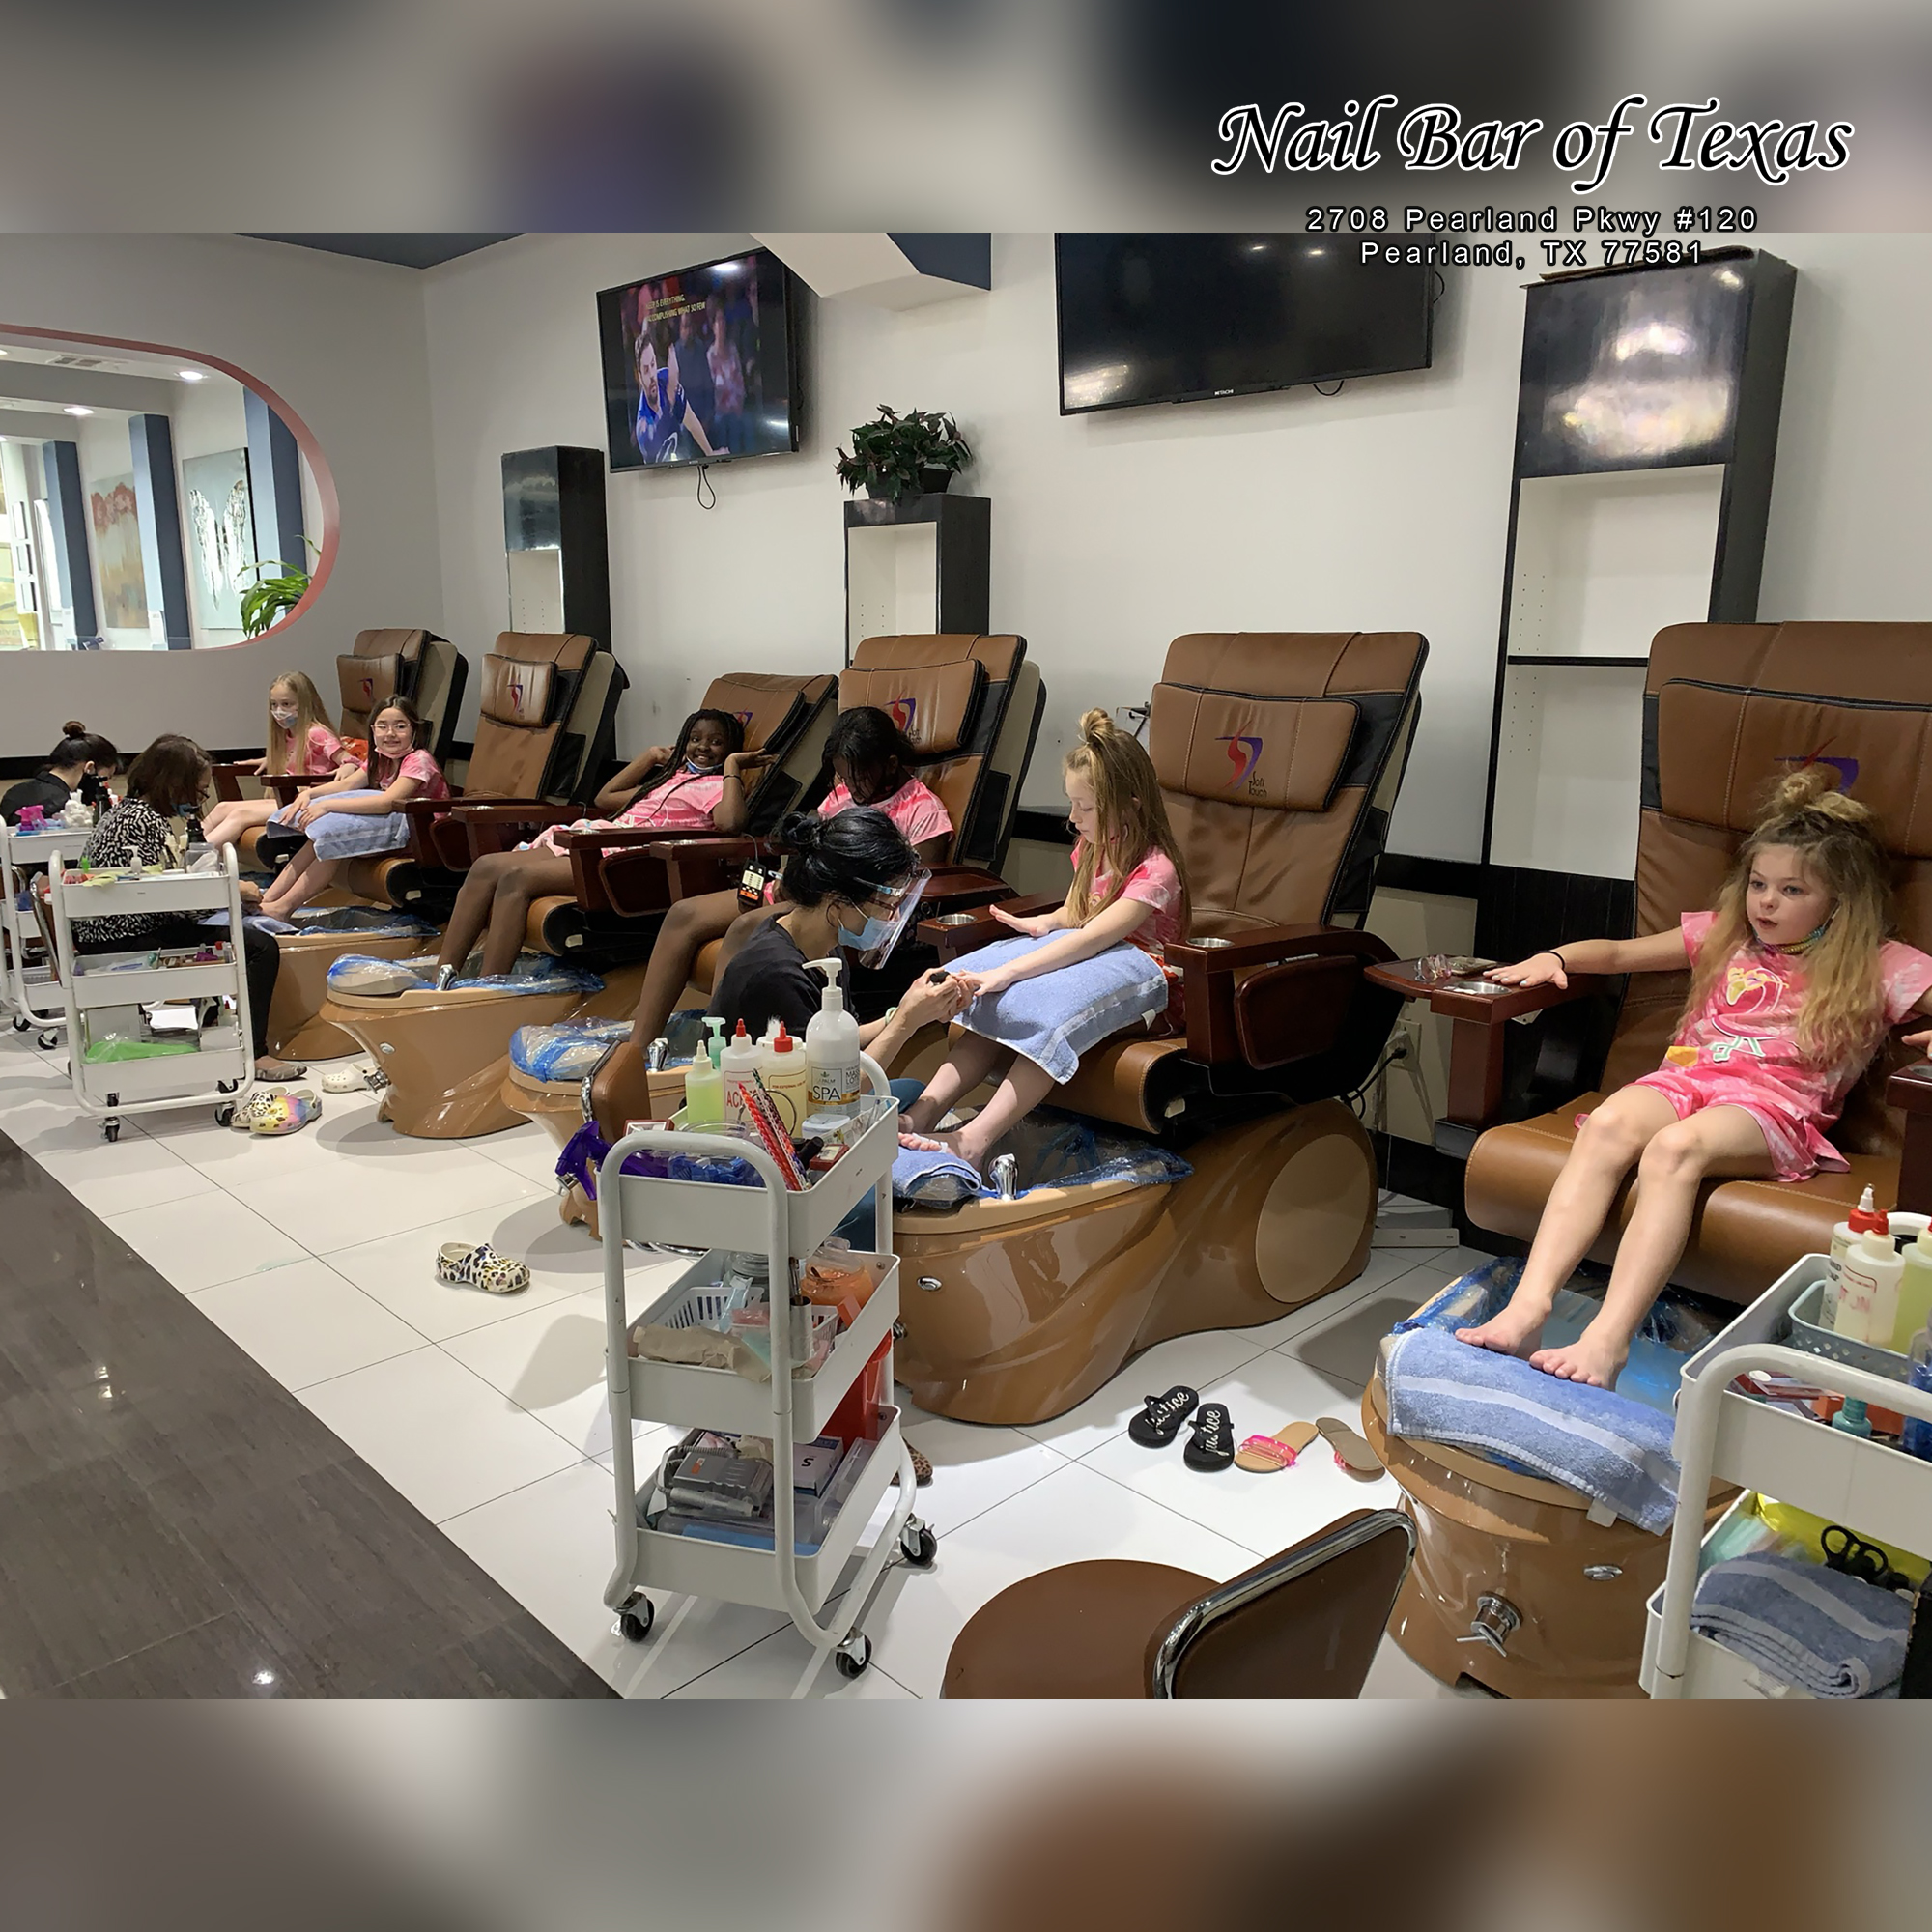 It’s time to get artistic with your nails – Top nail care salon near Pearland, TX 77581